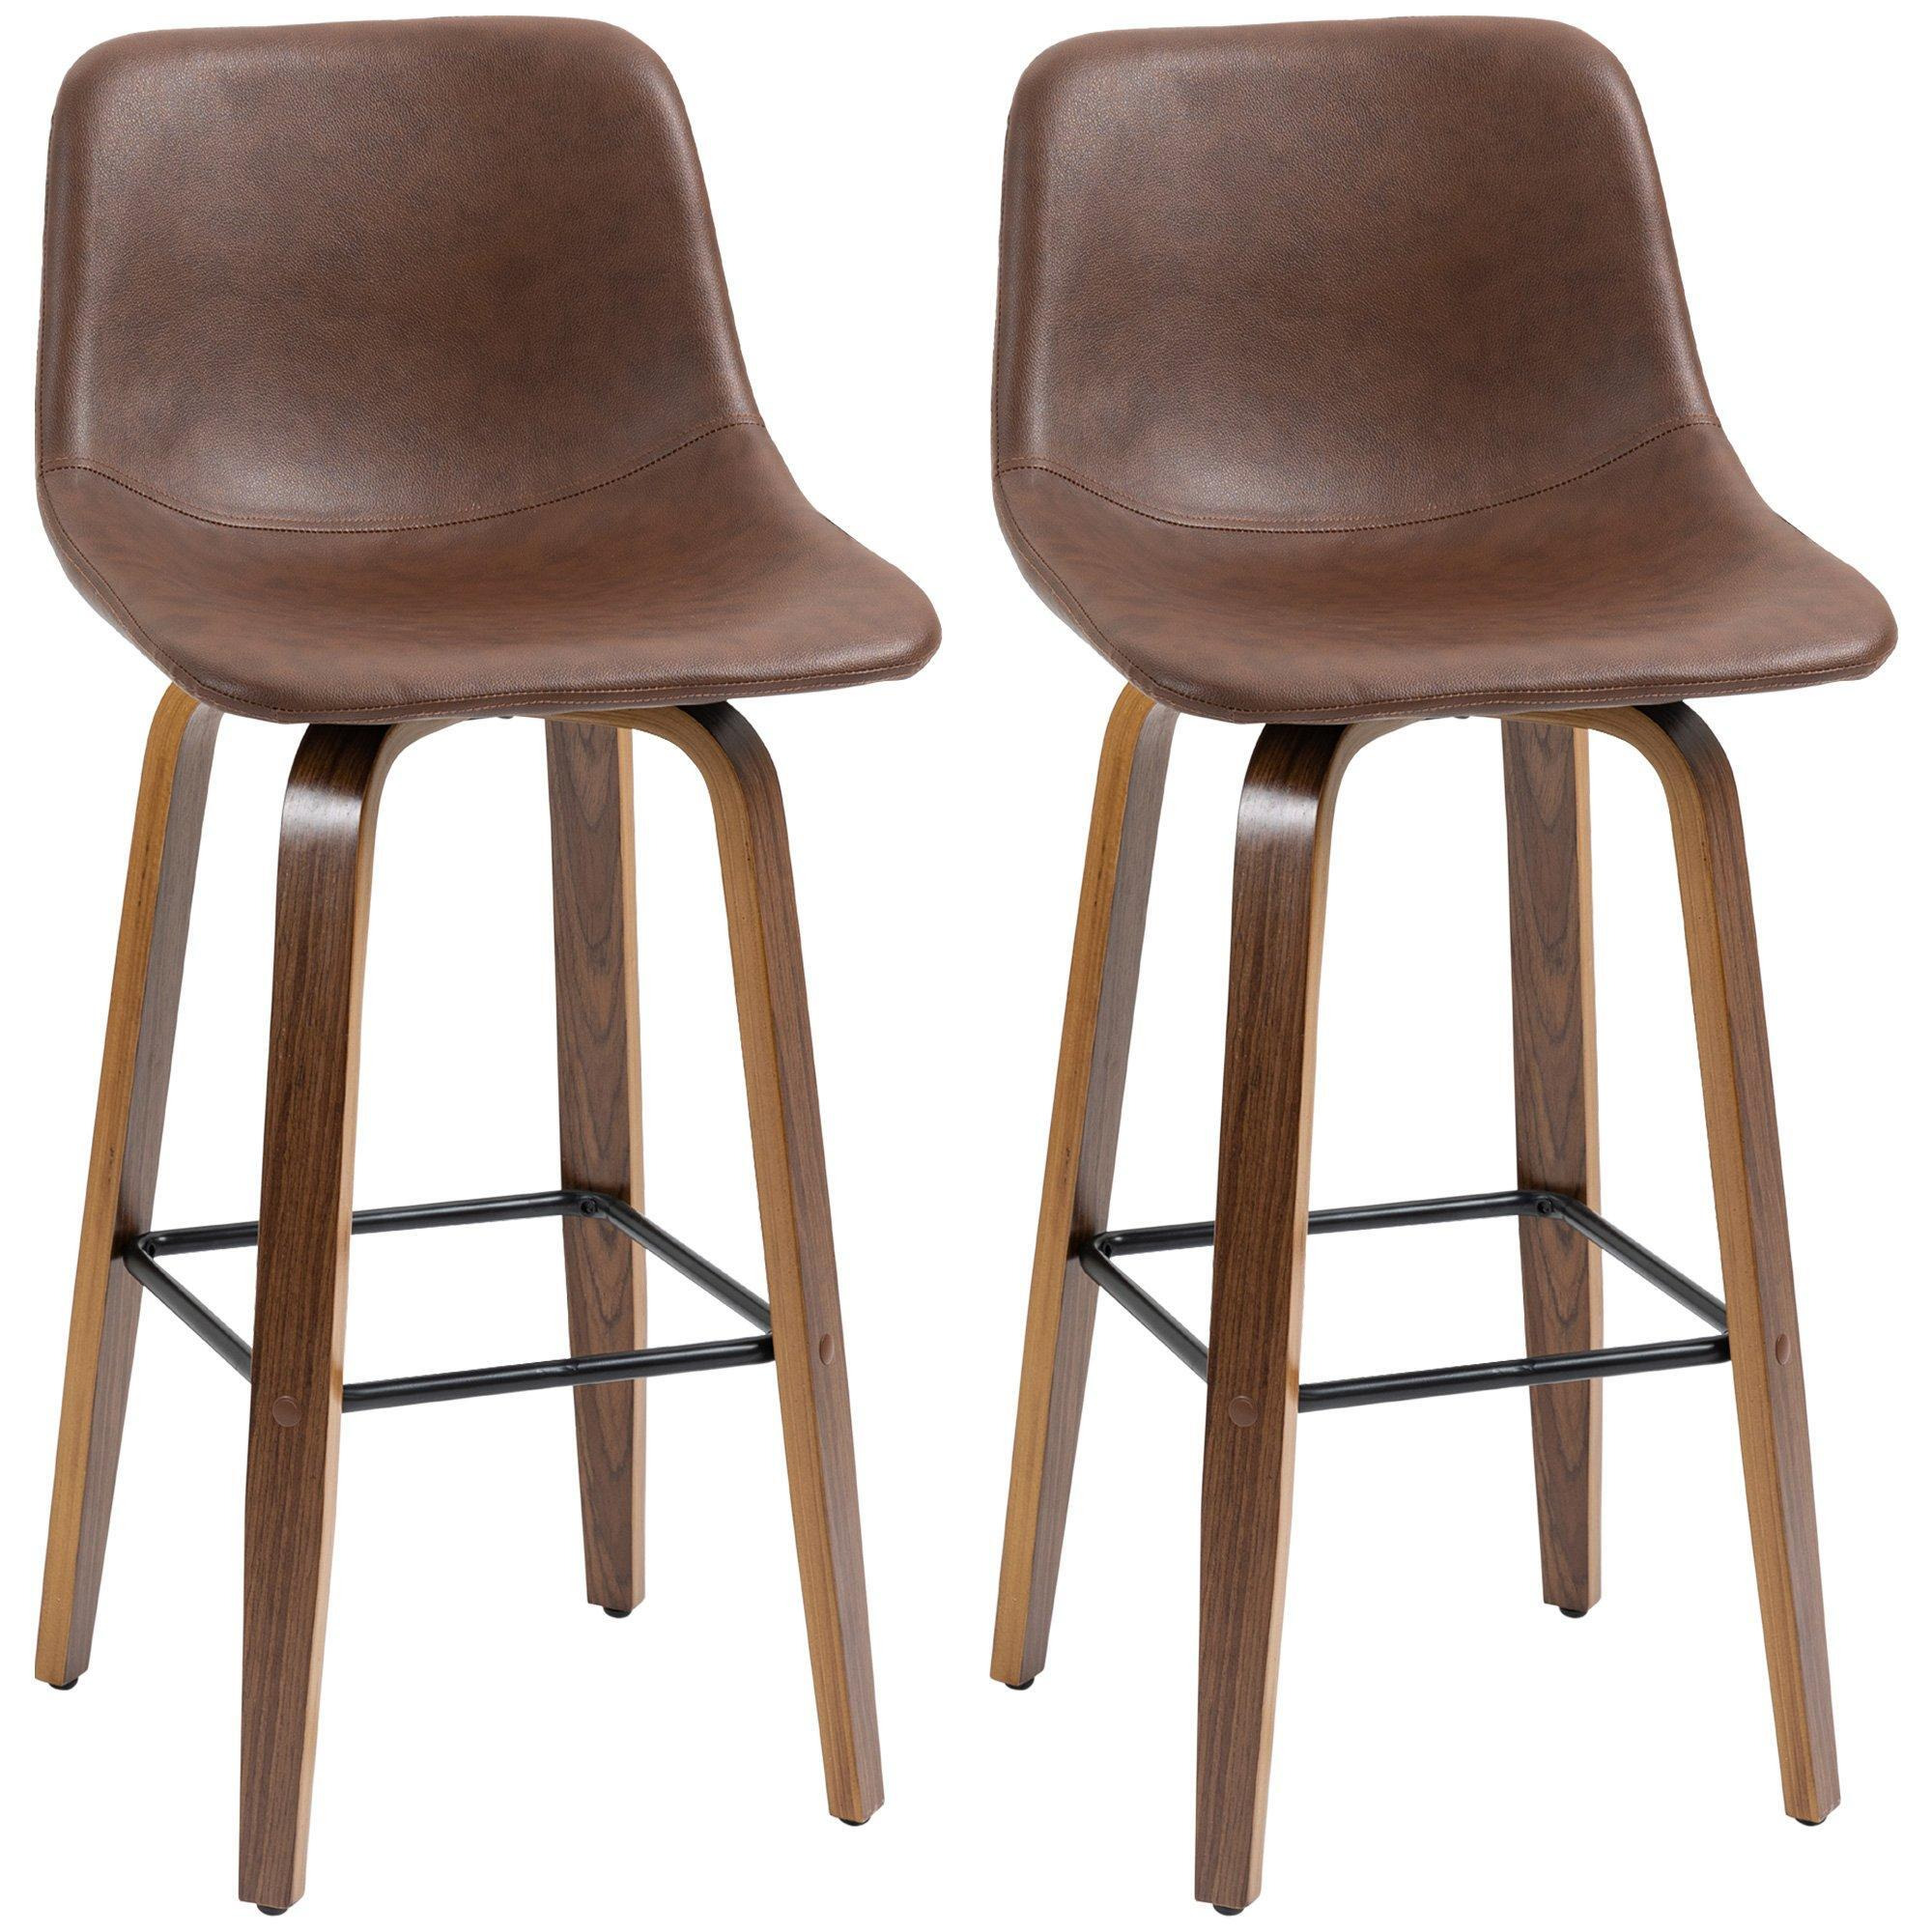 Bar stools Set of 2 Mid Back PU Leather Bar Chairs with Wood Legs Tall - image 1